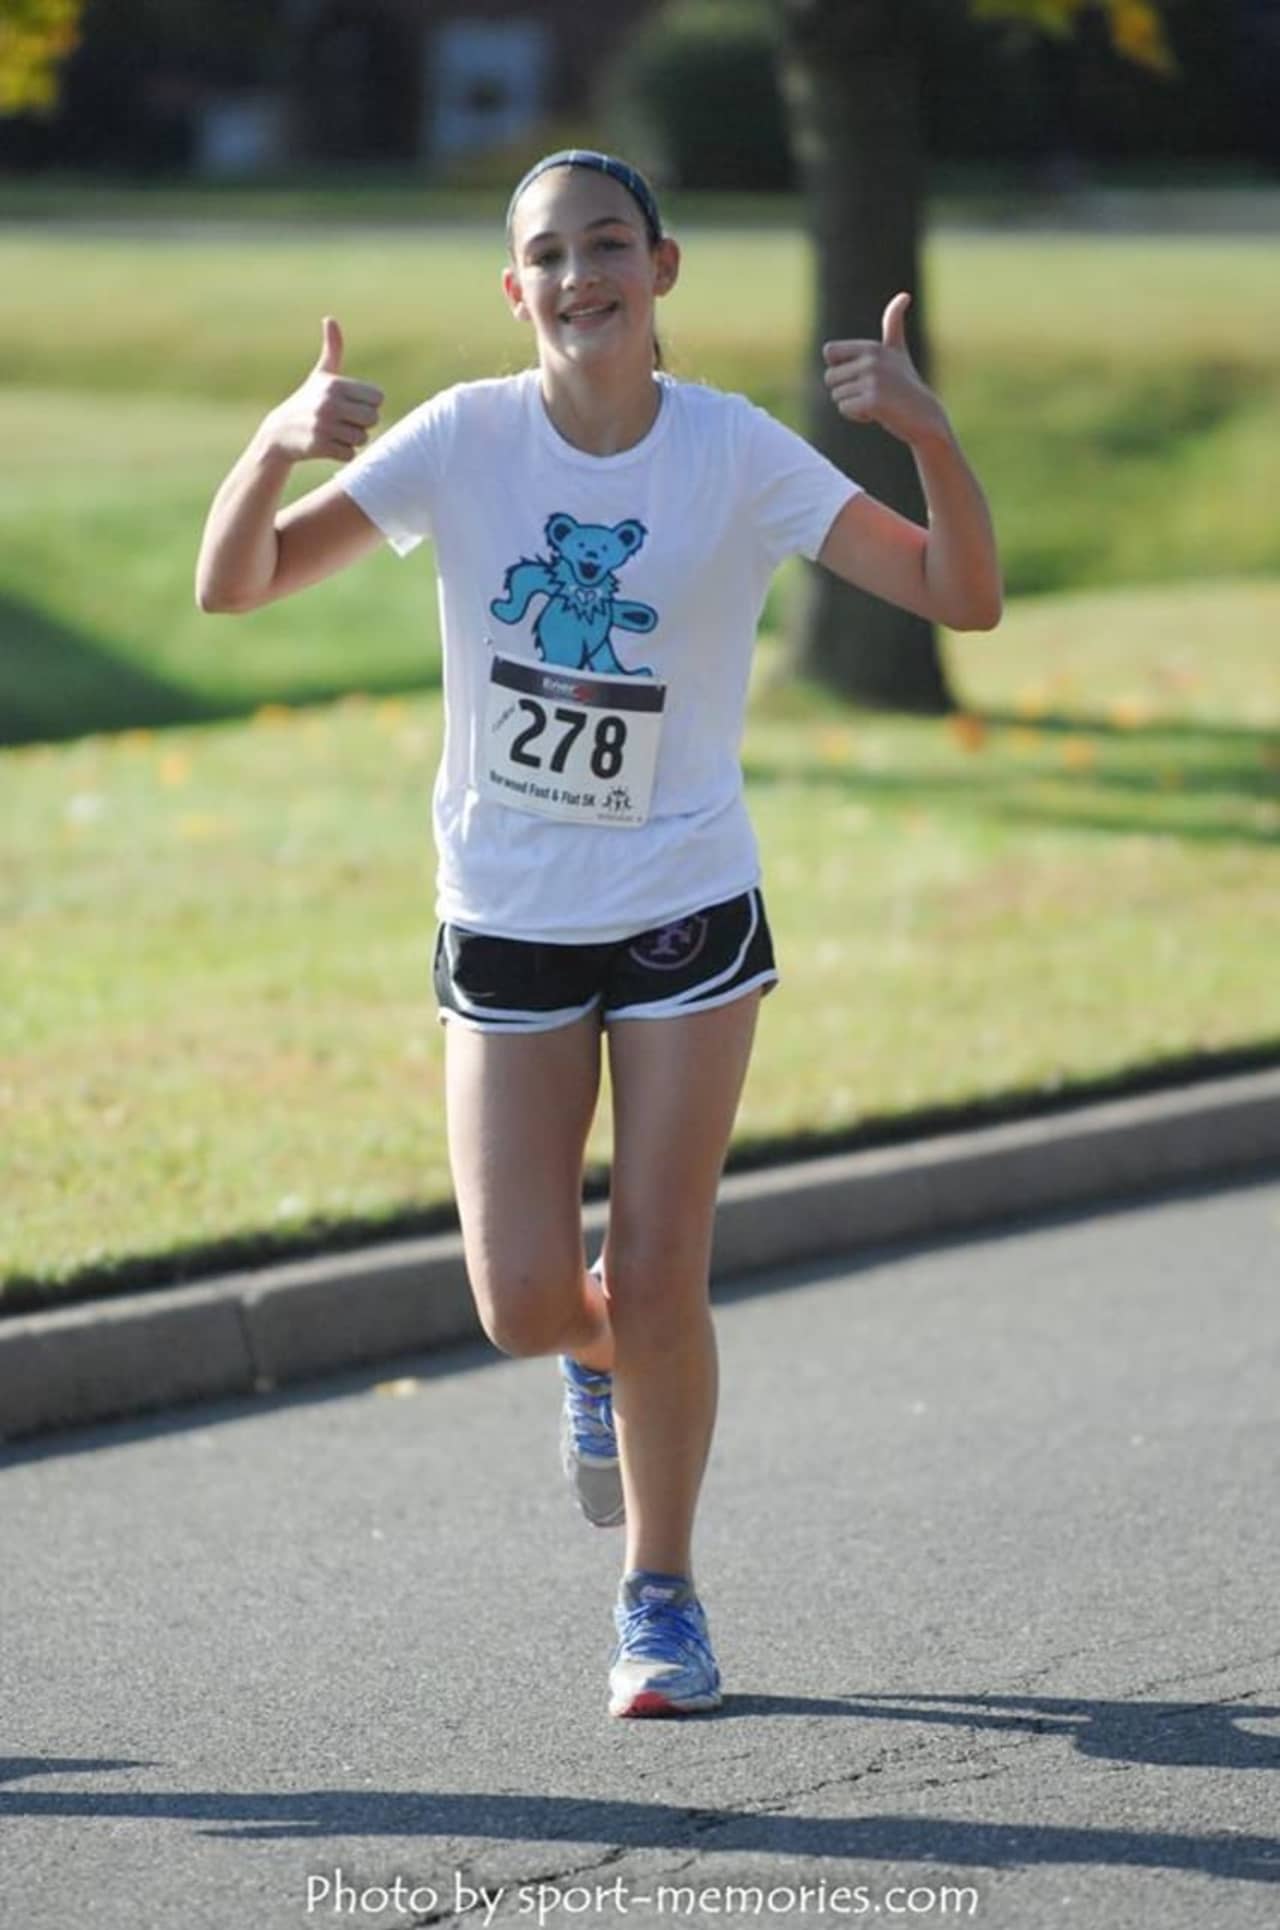 A scene from the 2014 Norwood 5K.